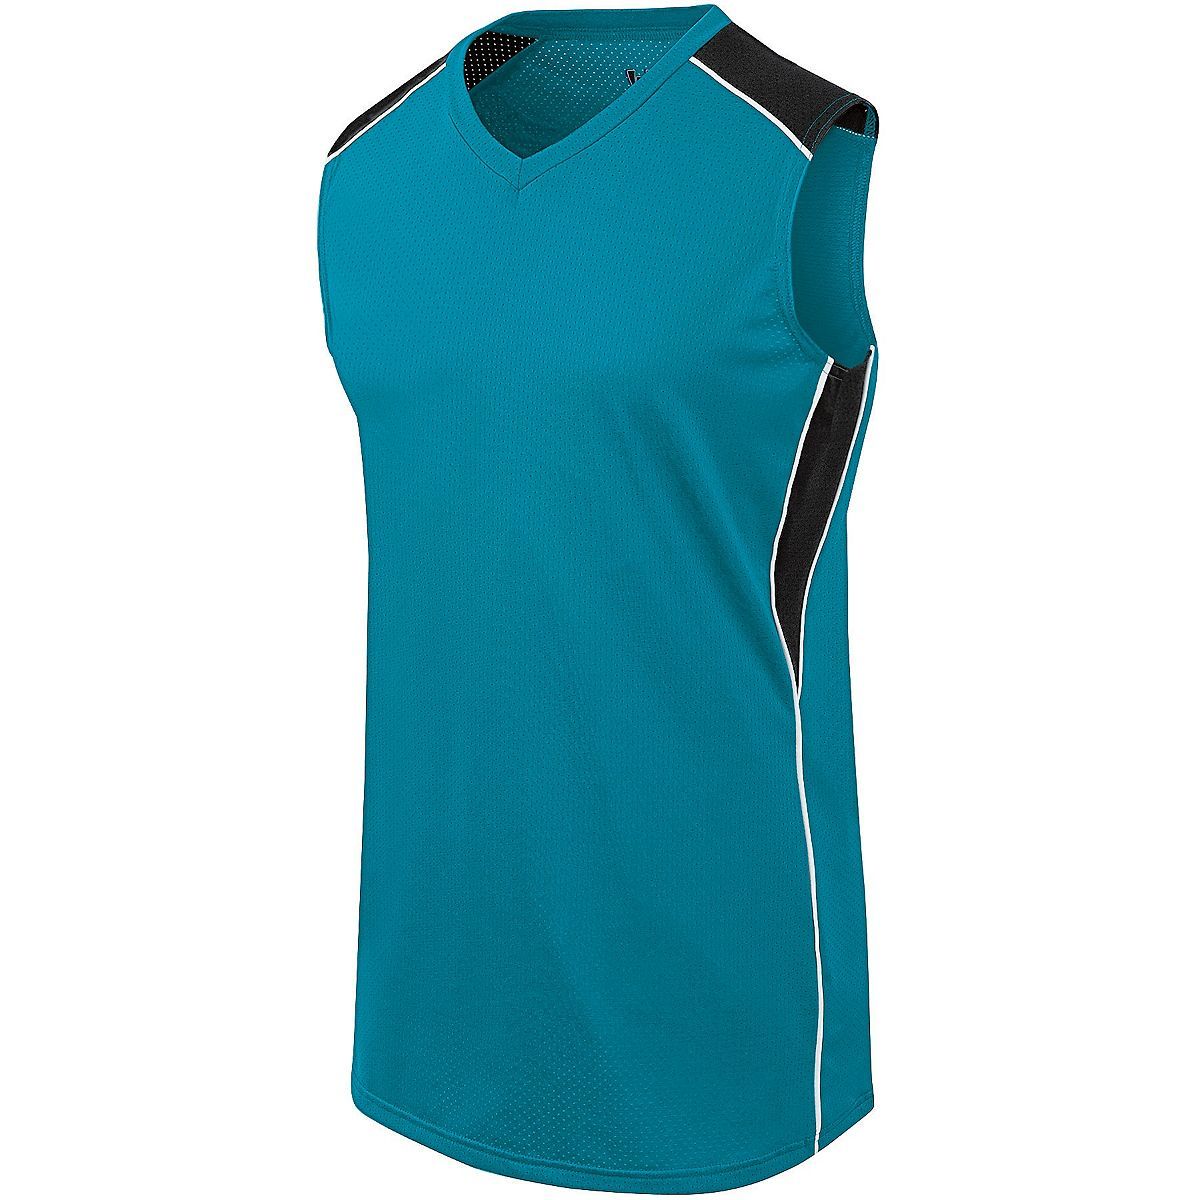 Augusta Sportswear Girls Dynamite Jersey in Teal/Black/White  -Part of the Girls, Augusta-Products, Softball, Girls-Jersey, Shirts product lines at KanaleyCreations.com